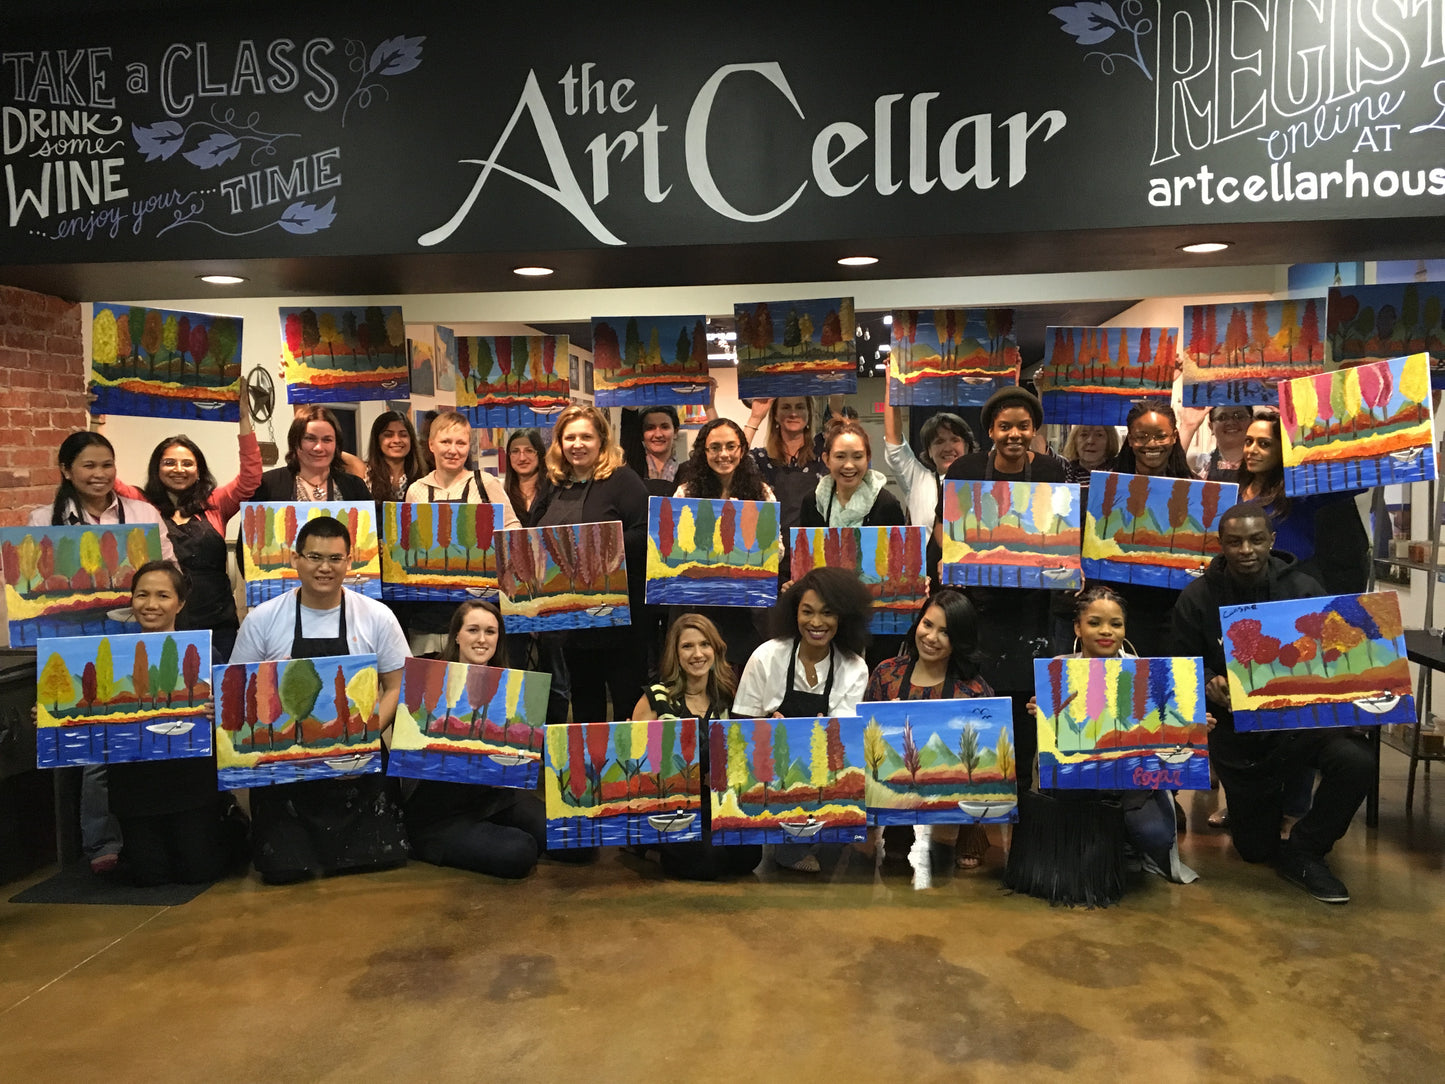 Wed, Sep 23, 530-730p "Cellar Sessions: Alcohol Inks” Zoom Painting Class